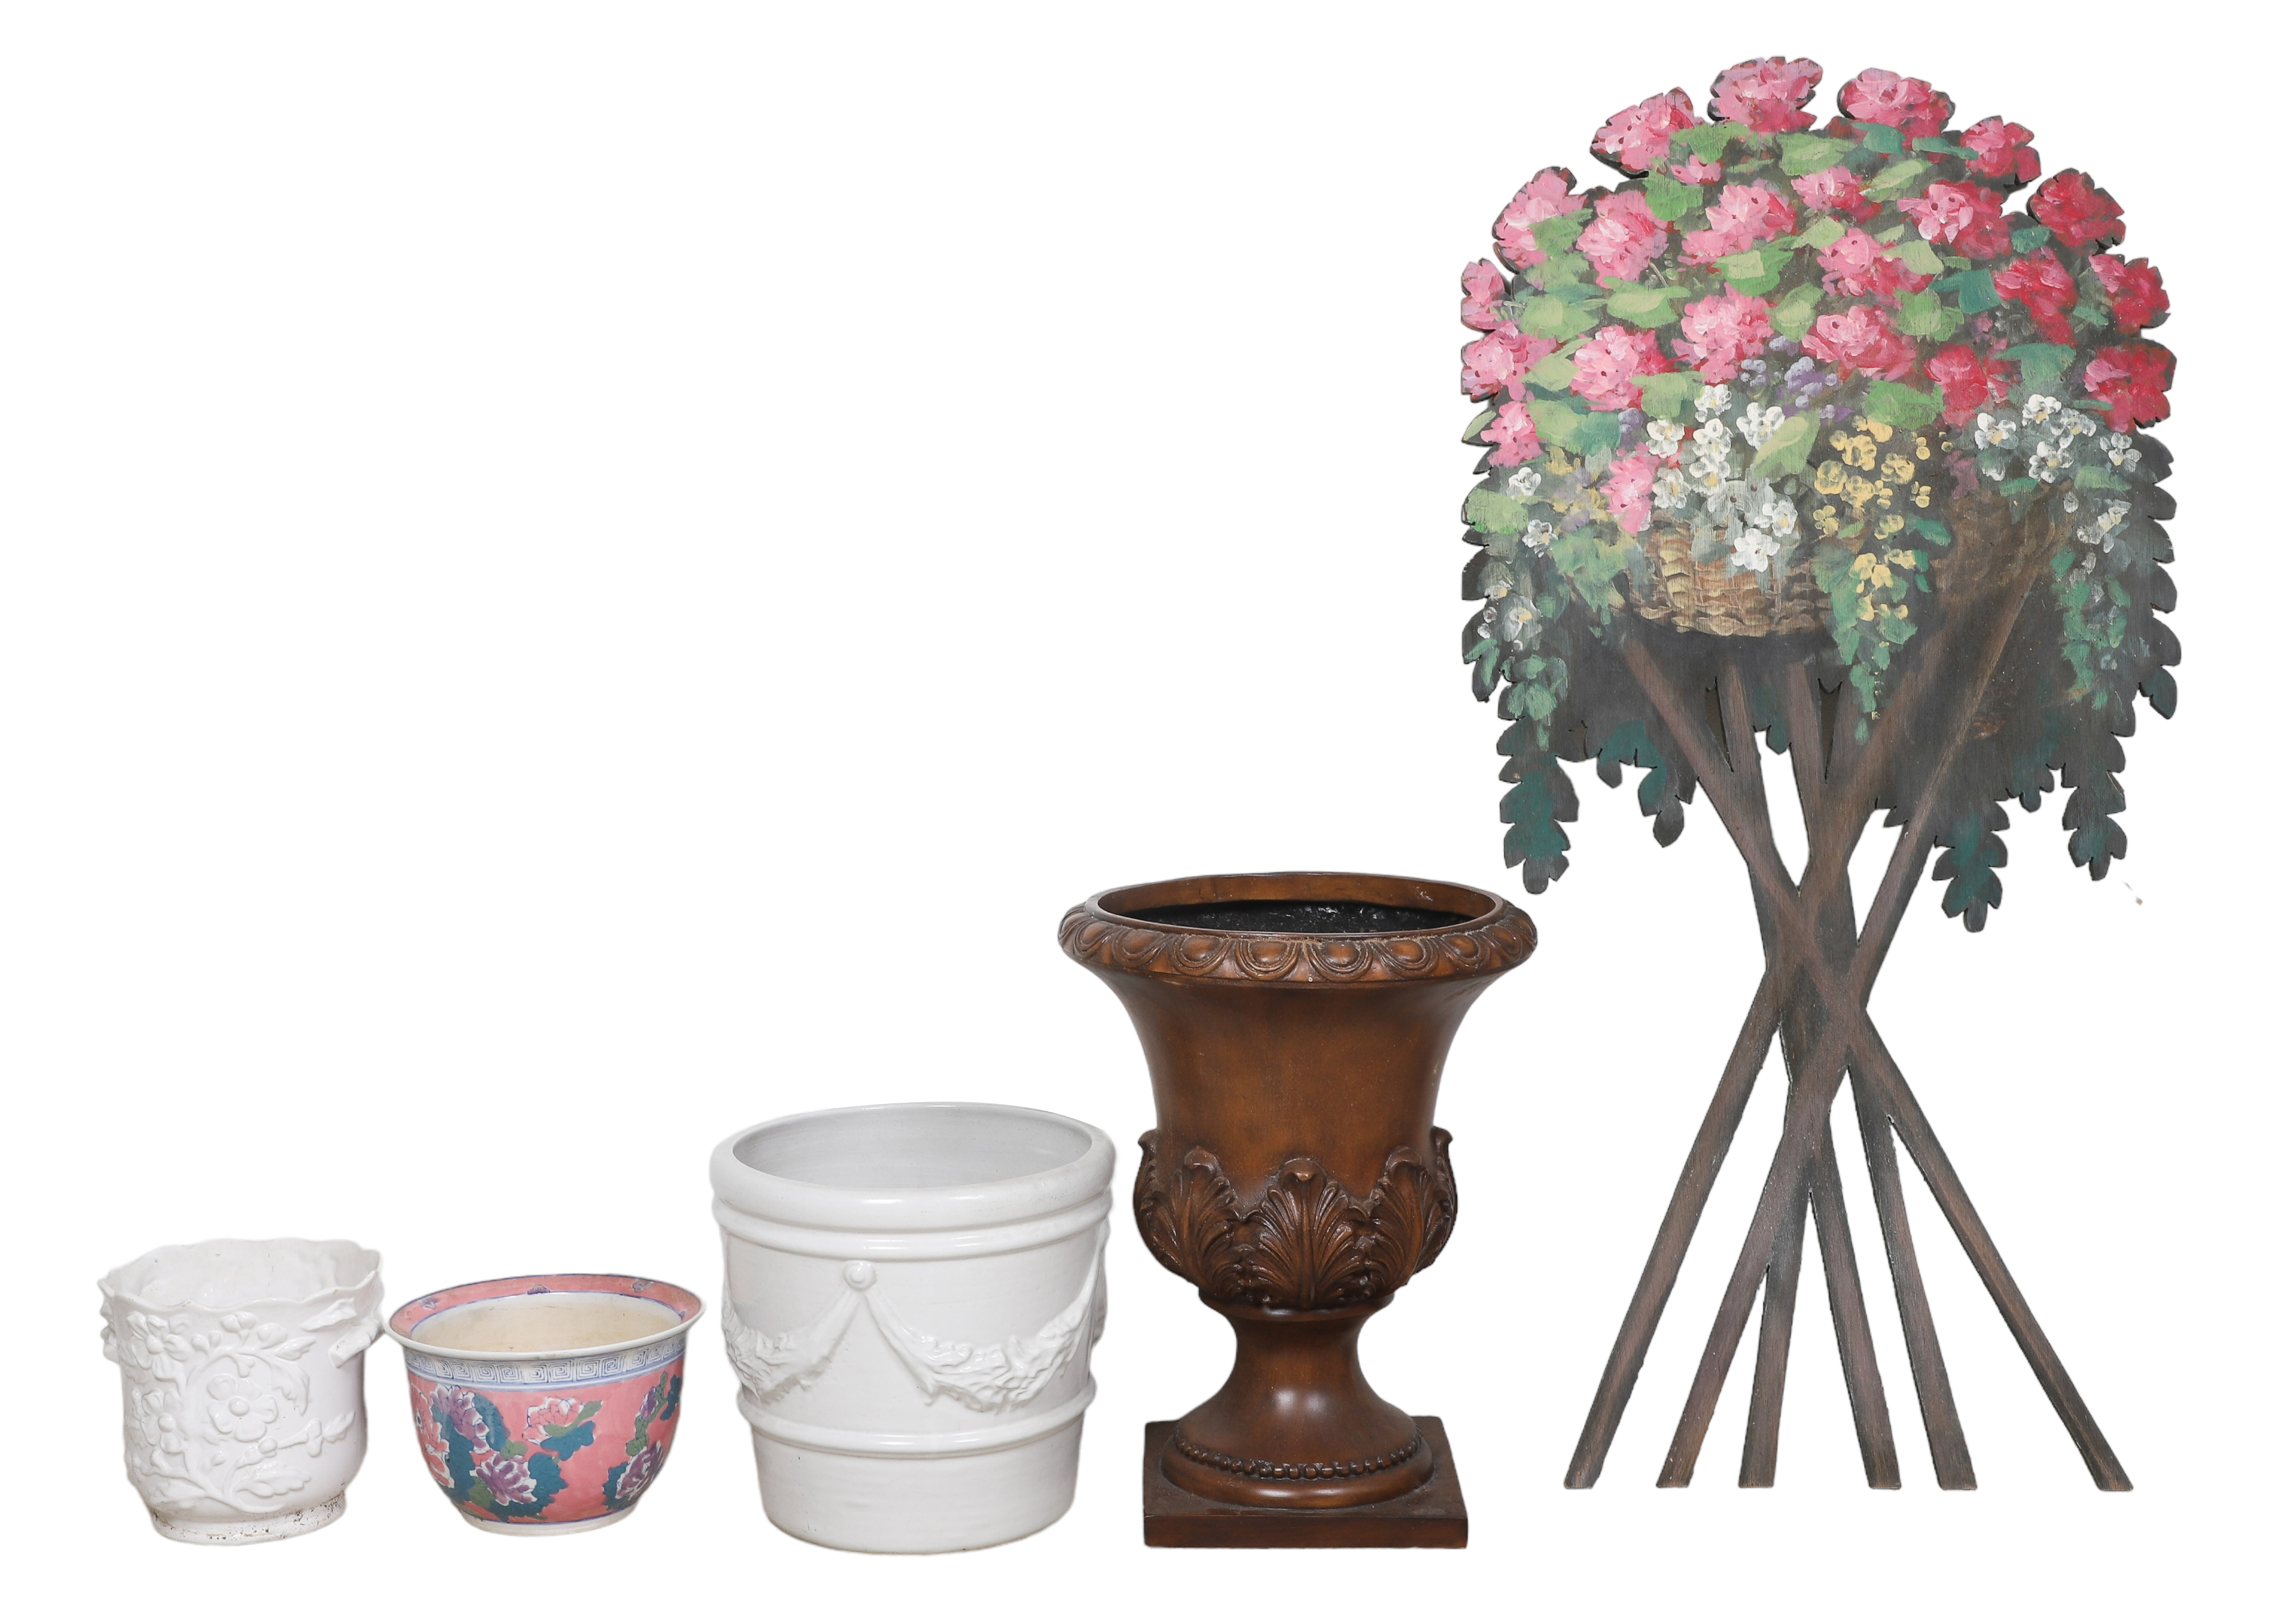  5 Planters and floral painted 2e1dfb